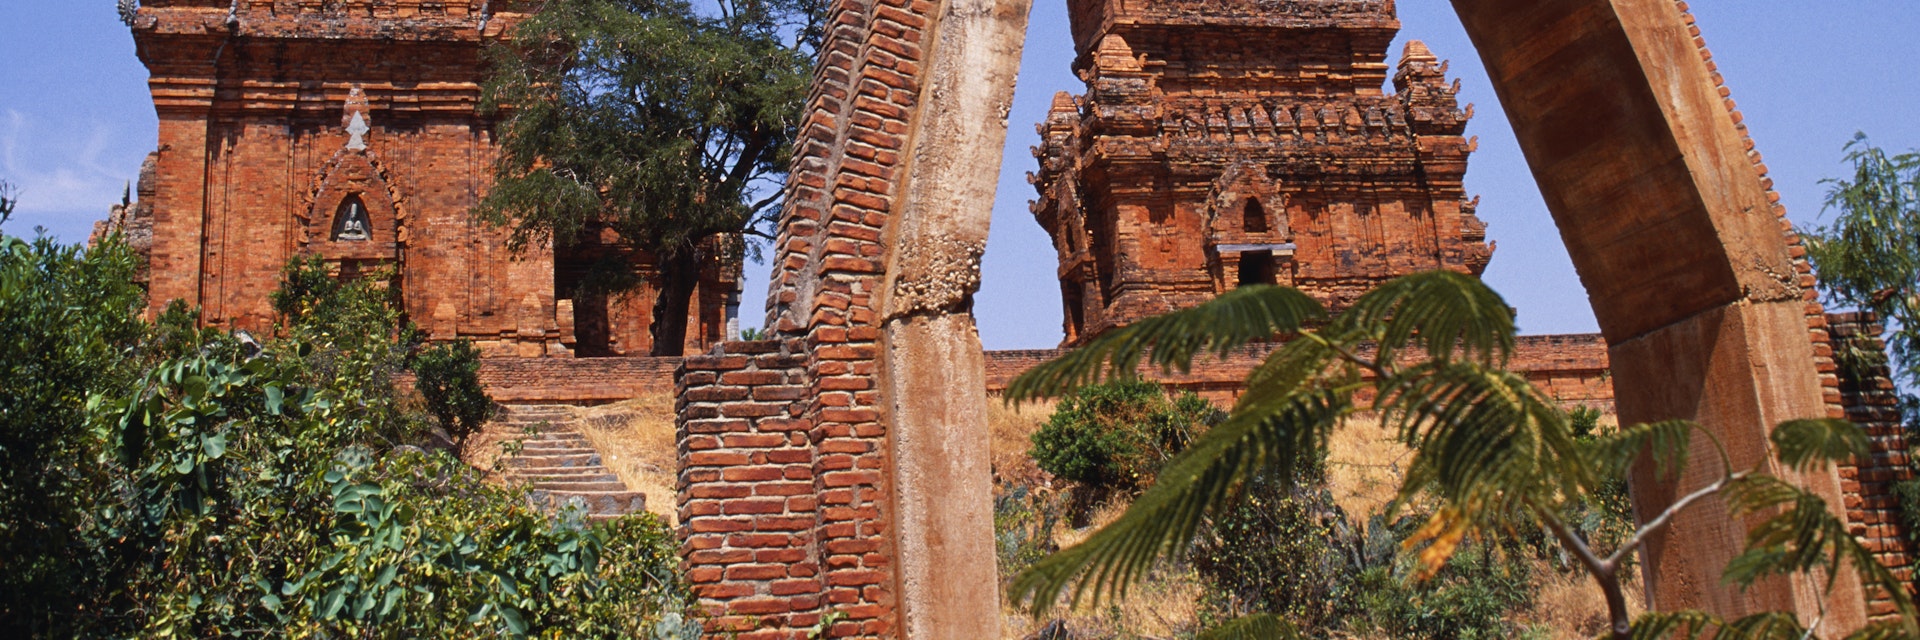 Vietnam, Ninh Thuan Province, Phan Rang. Po Klong Garai Cham Towers.Brick built remnants of the Cham Kingdom of Panduranga, which dates back to 14th Century and the rule of King Jaya Simharvarman III. Not only are the towers famous for their architecture